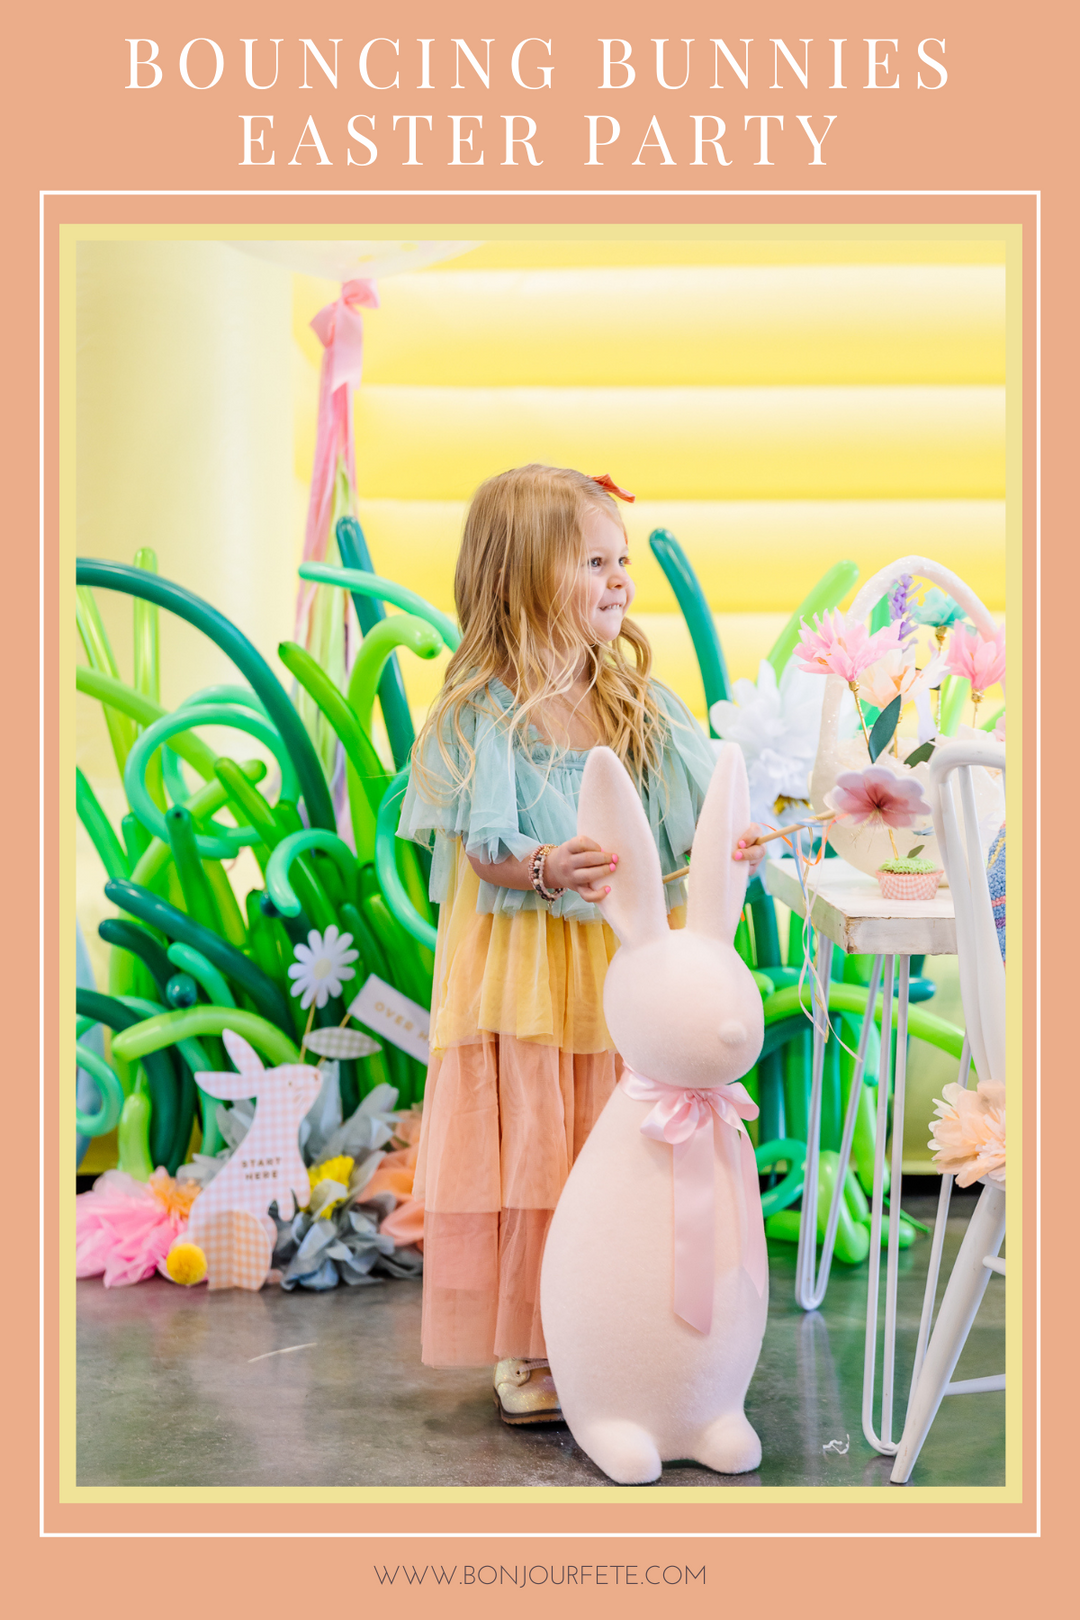 FRESH EASTER PARTY IDEAS AND DECORATIONS